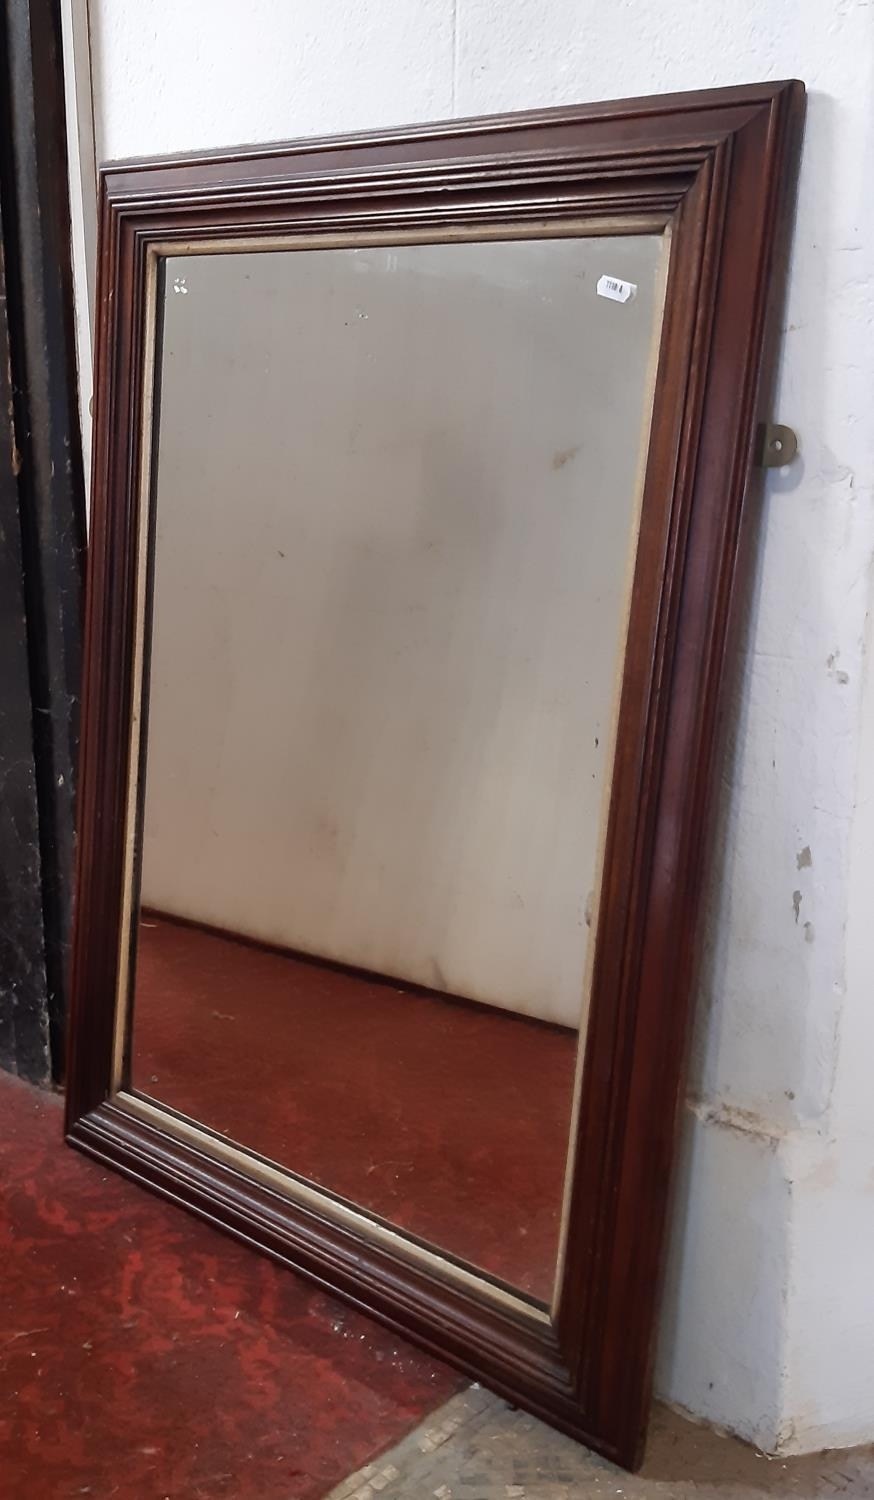 A simple 19th century wall mirror with stepped and moulded frame, 92cm x 65cm